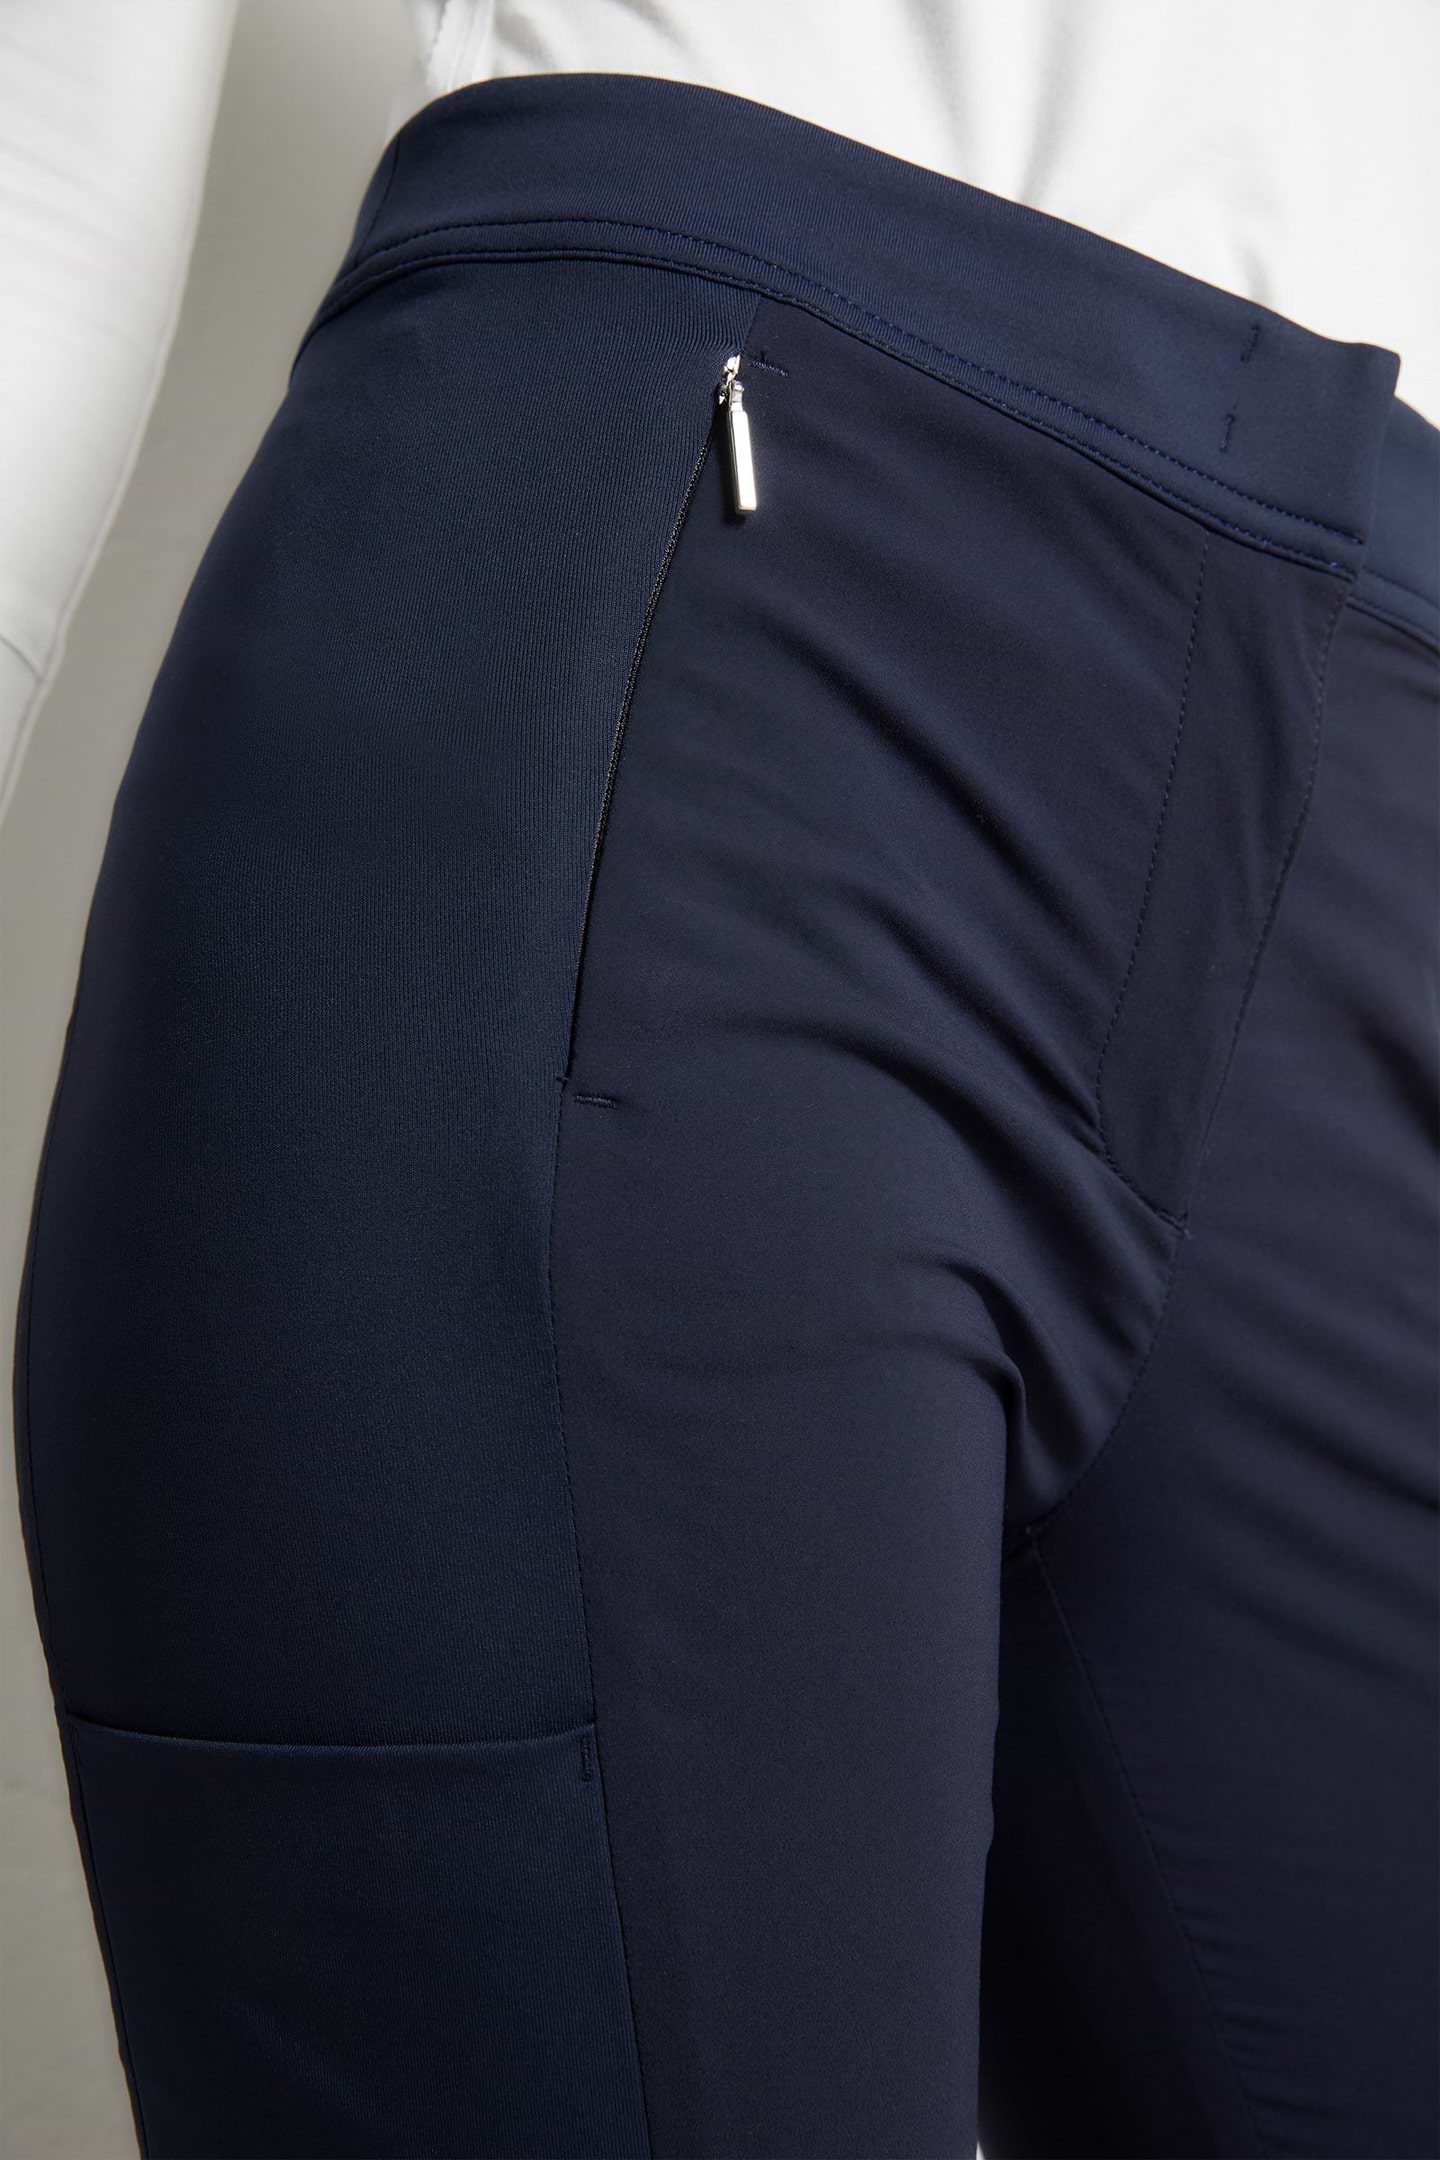 The Best Travel Pants. Front Zipper Pocket of the Ipant Hybrid Zip Front Slim Fit Pant in Navy